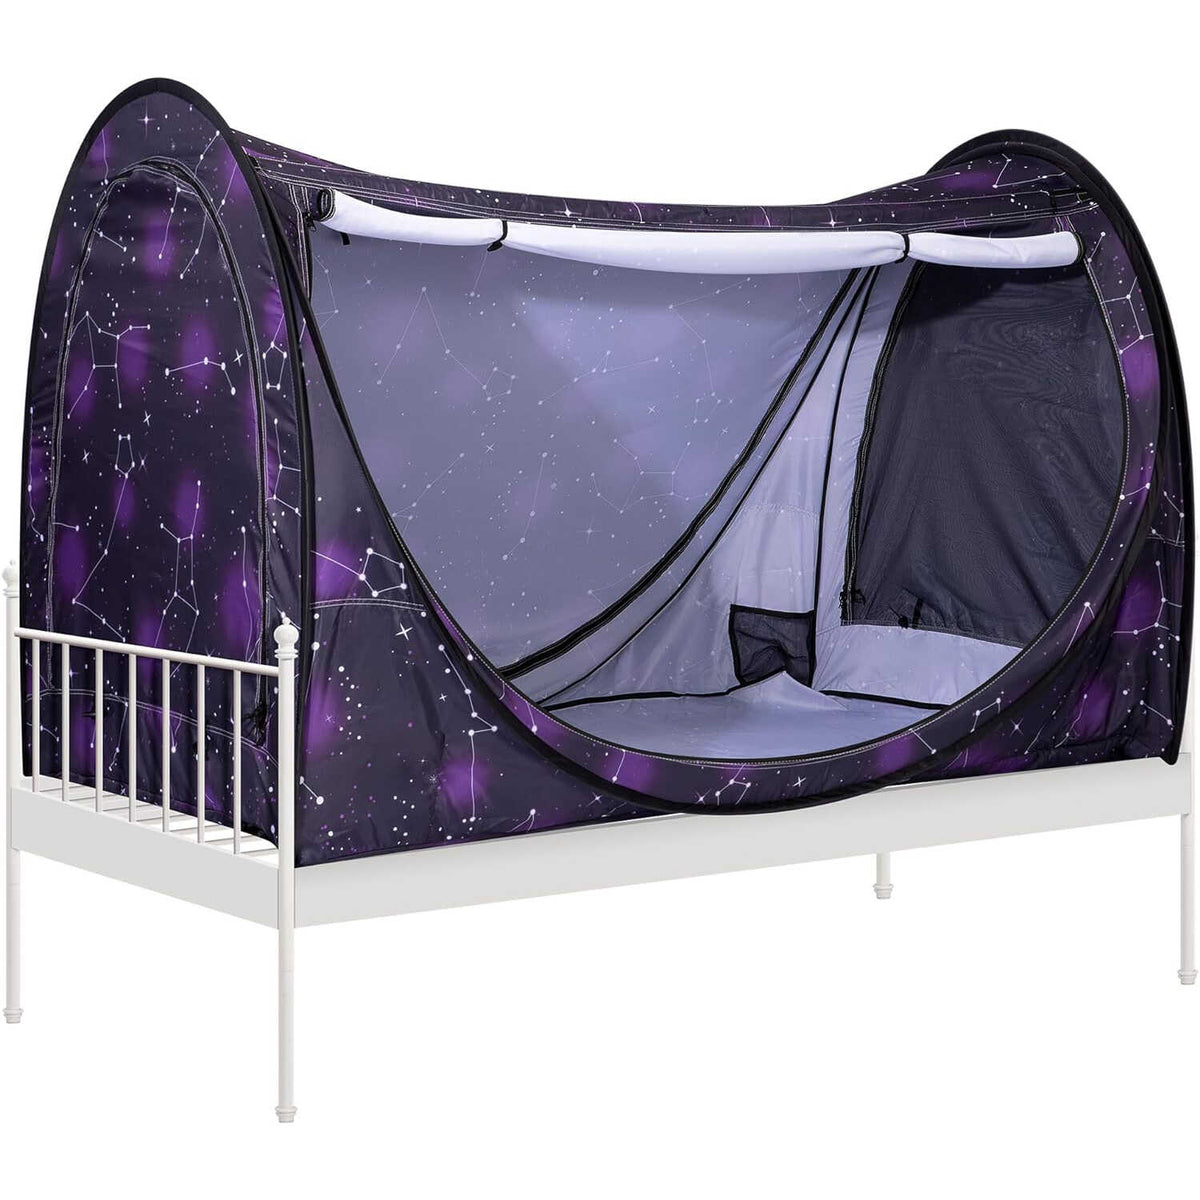 VIVOHOME Pop-Up Bed Tent with 4 Doors and Mosquito Mesh